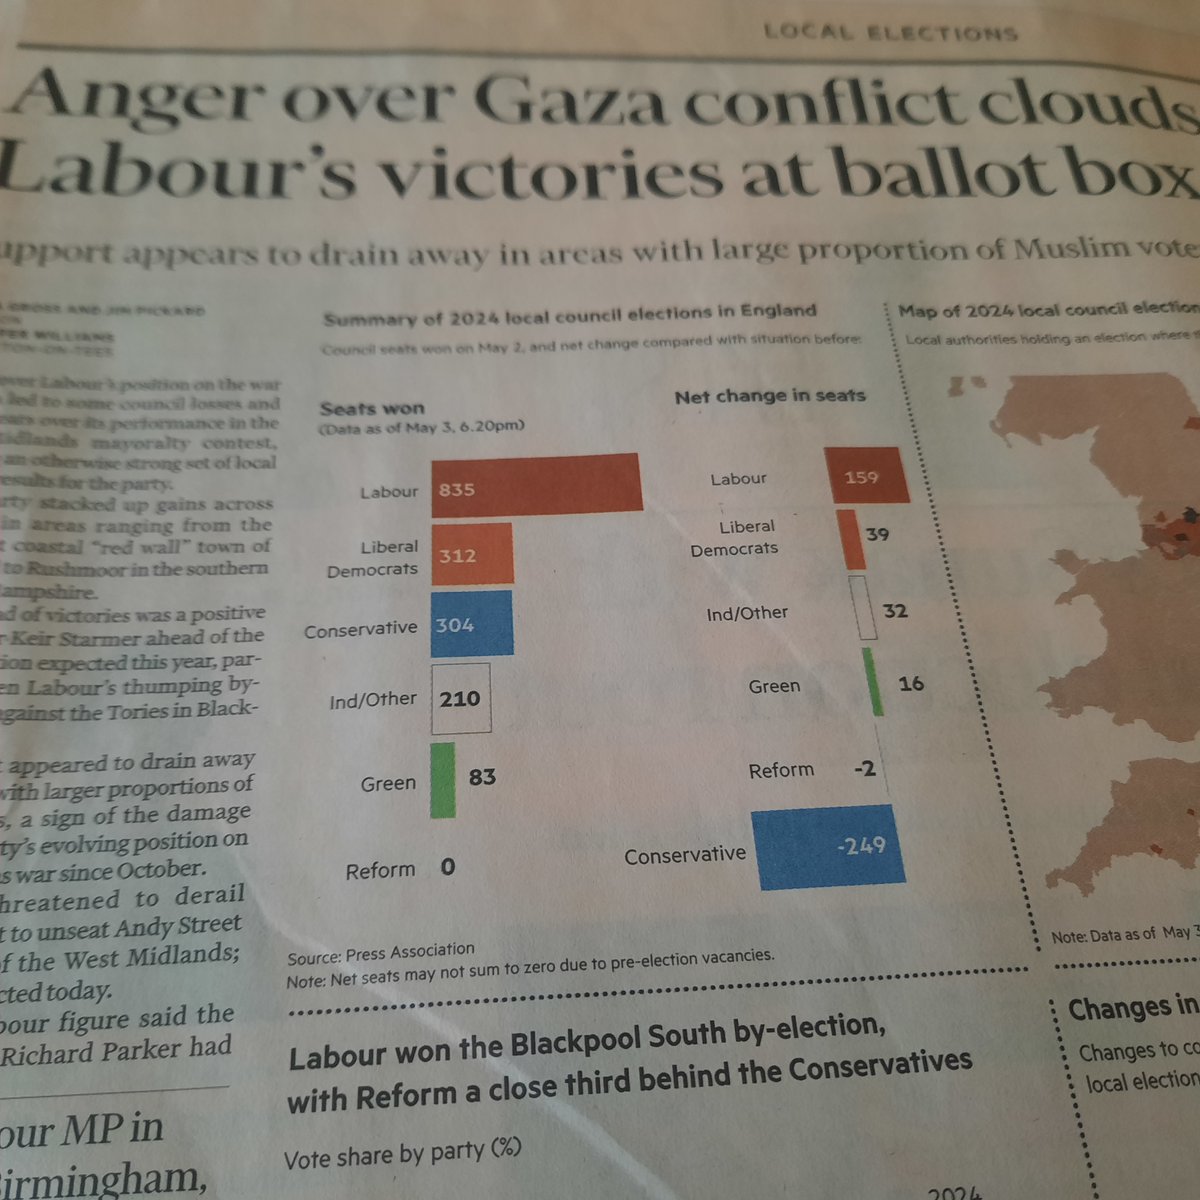 The FT's election analysis concentrates on the rise of the independents and the Greens driven by Labour's loss of support over Gaza. Another politics is possible.